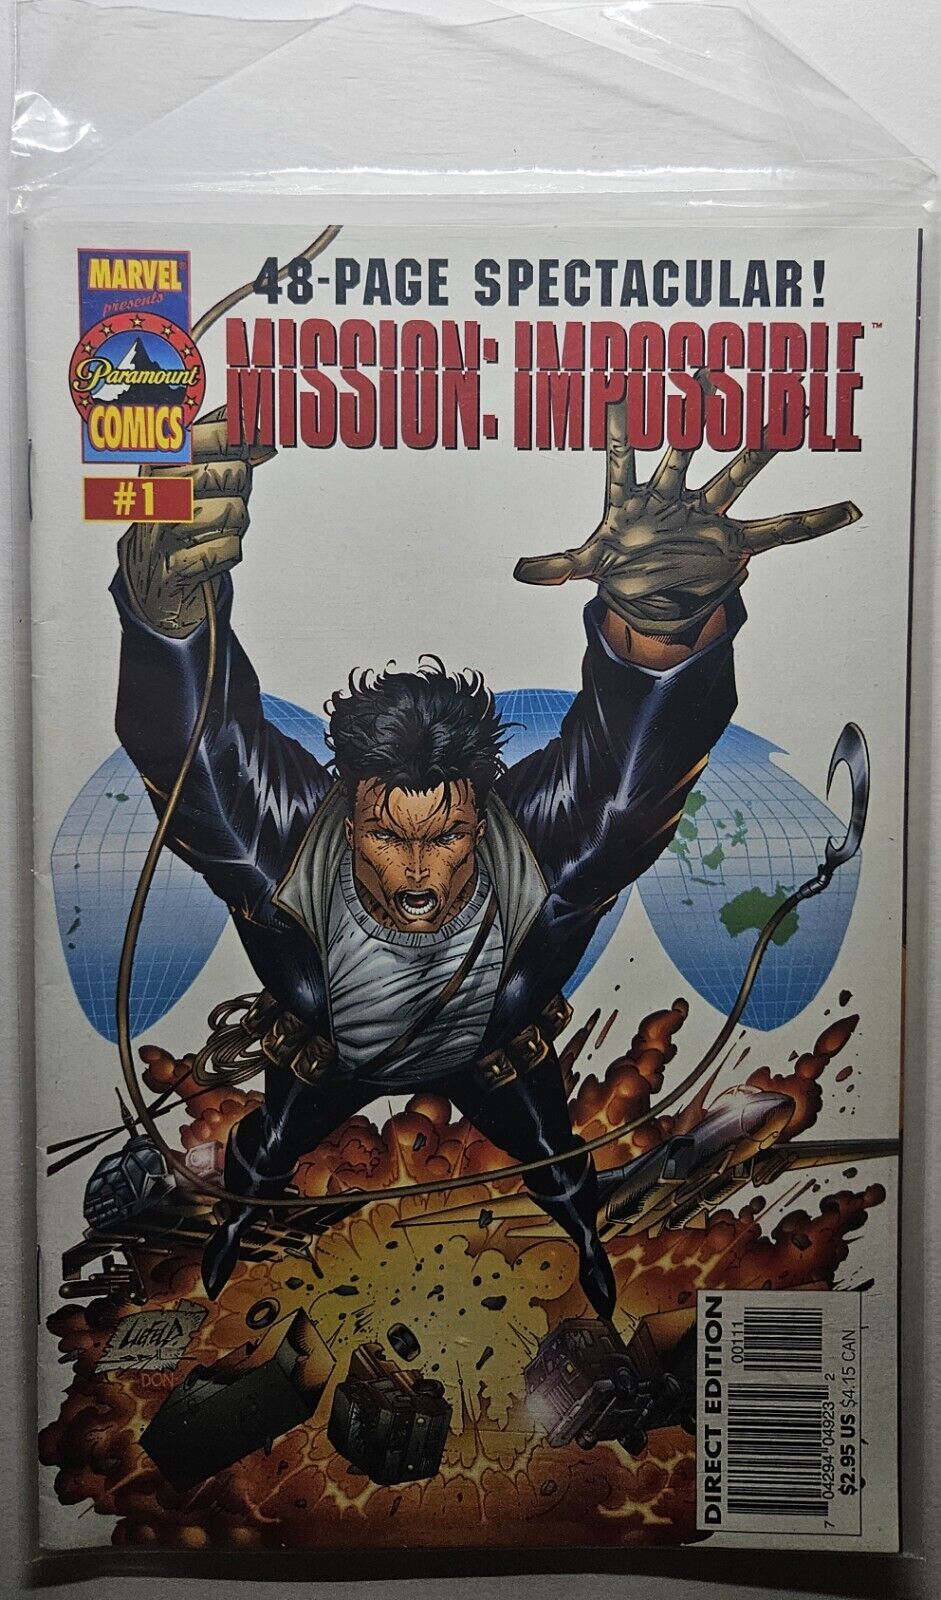 Mission: Impossible #1 (Marvel, May 1996)